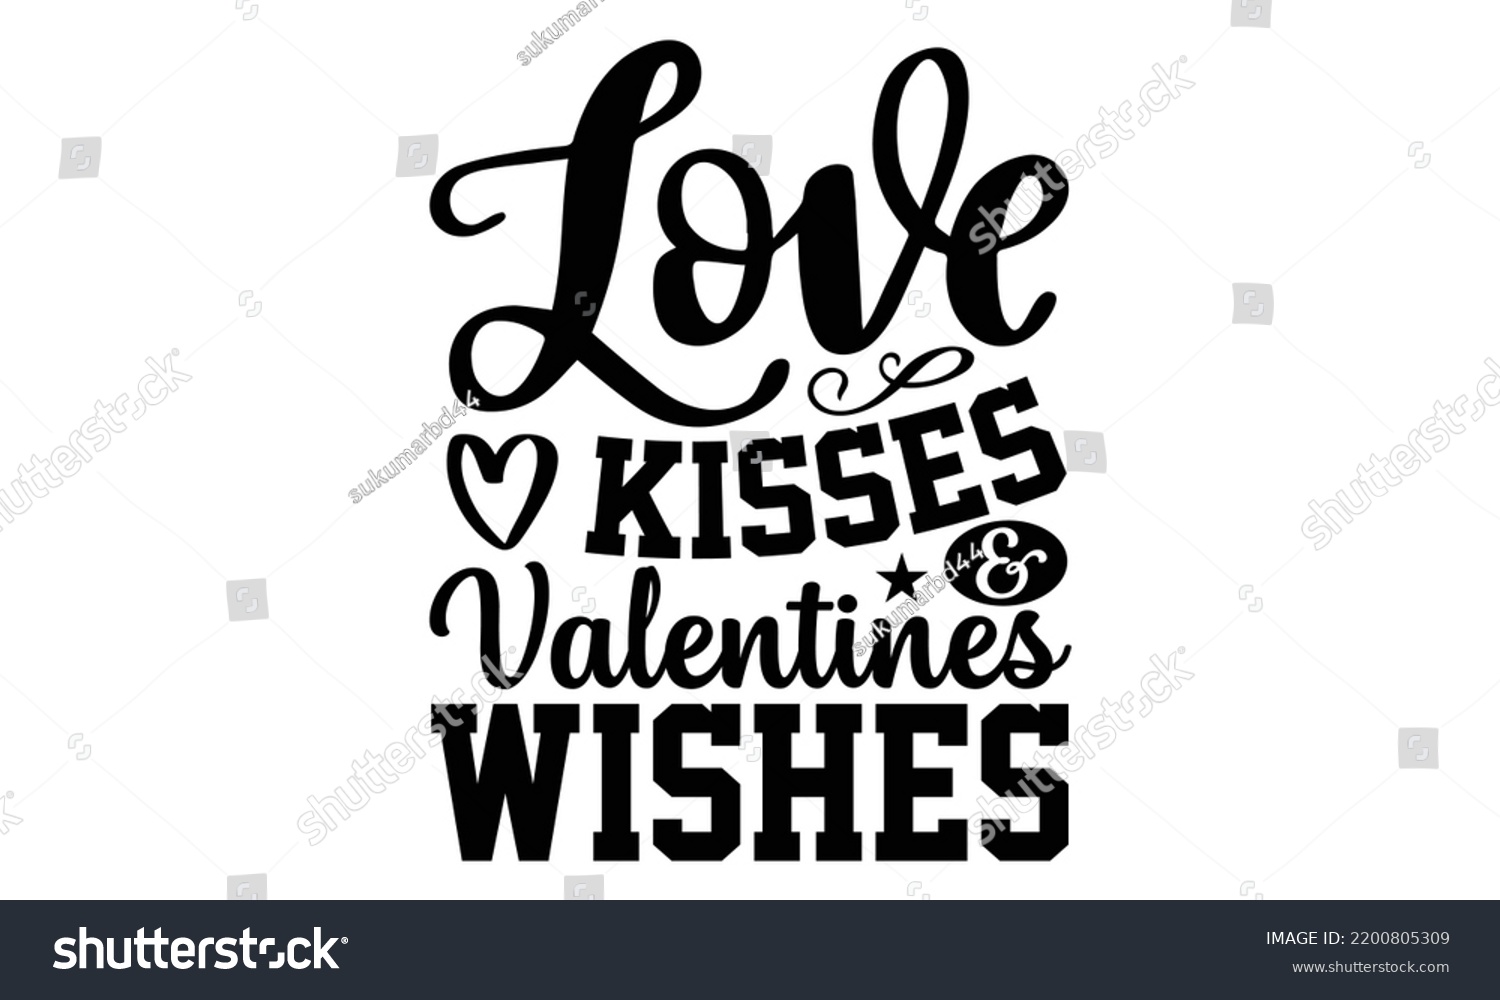 SVG of Love Kisses and Valentines Wishes - Valentine's Day t shirt design, Calligraphy graphic design, Hand written vector t shirt design, lettering phrase isolated on white background, svg Files for svg